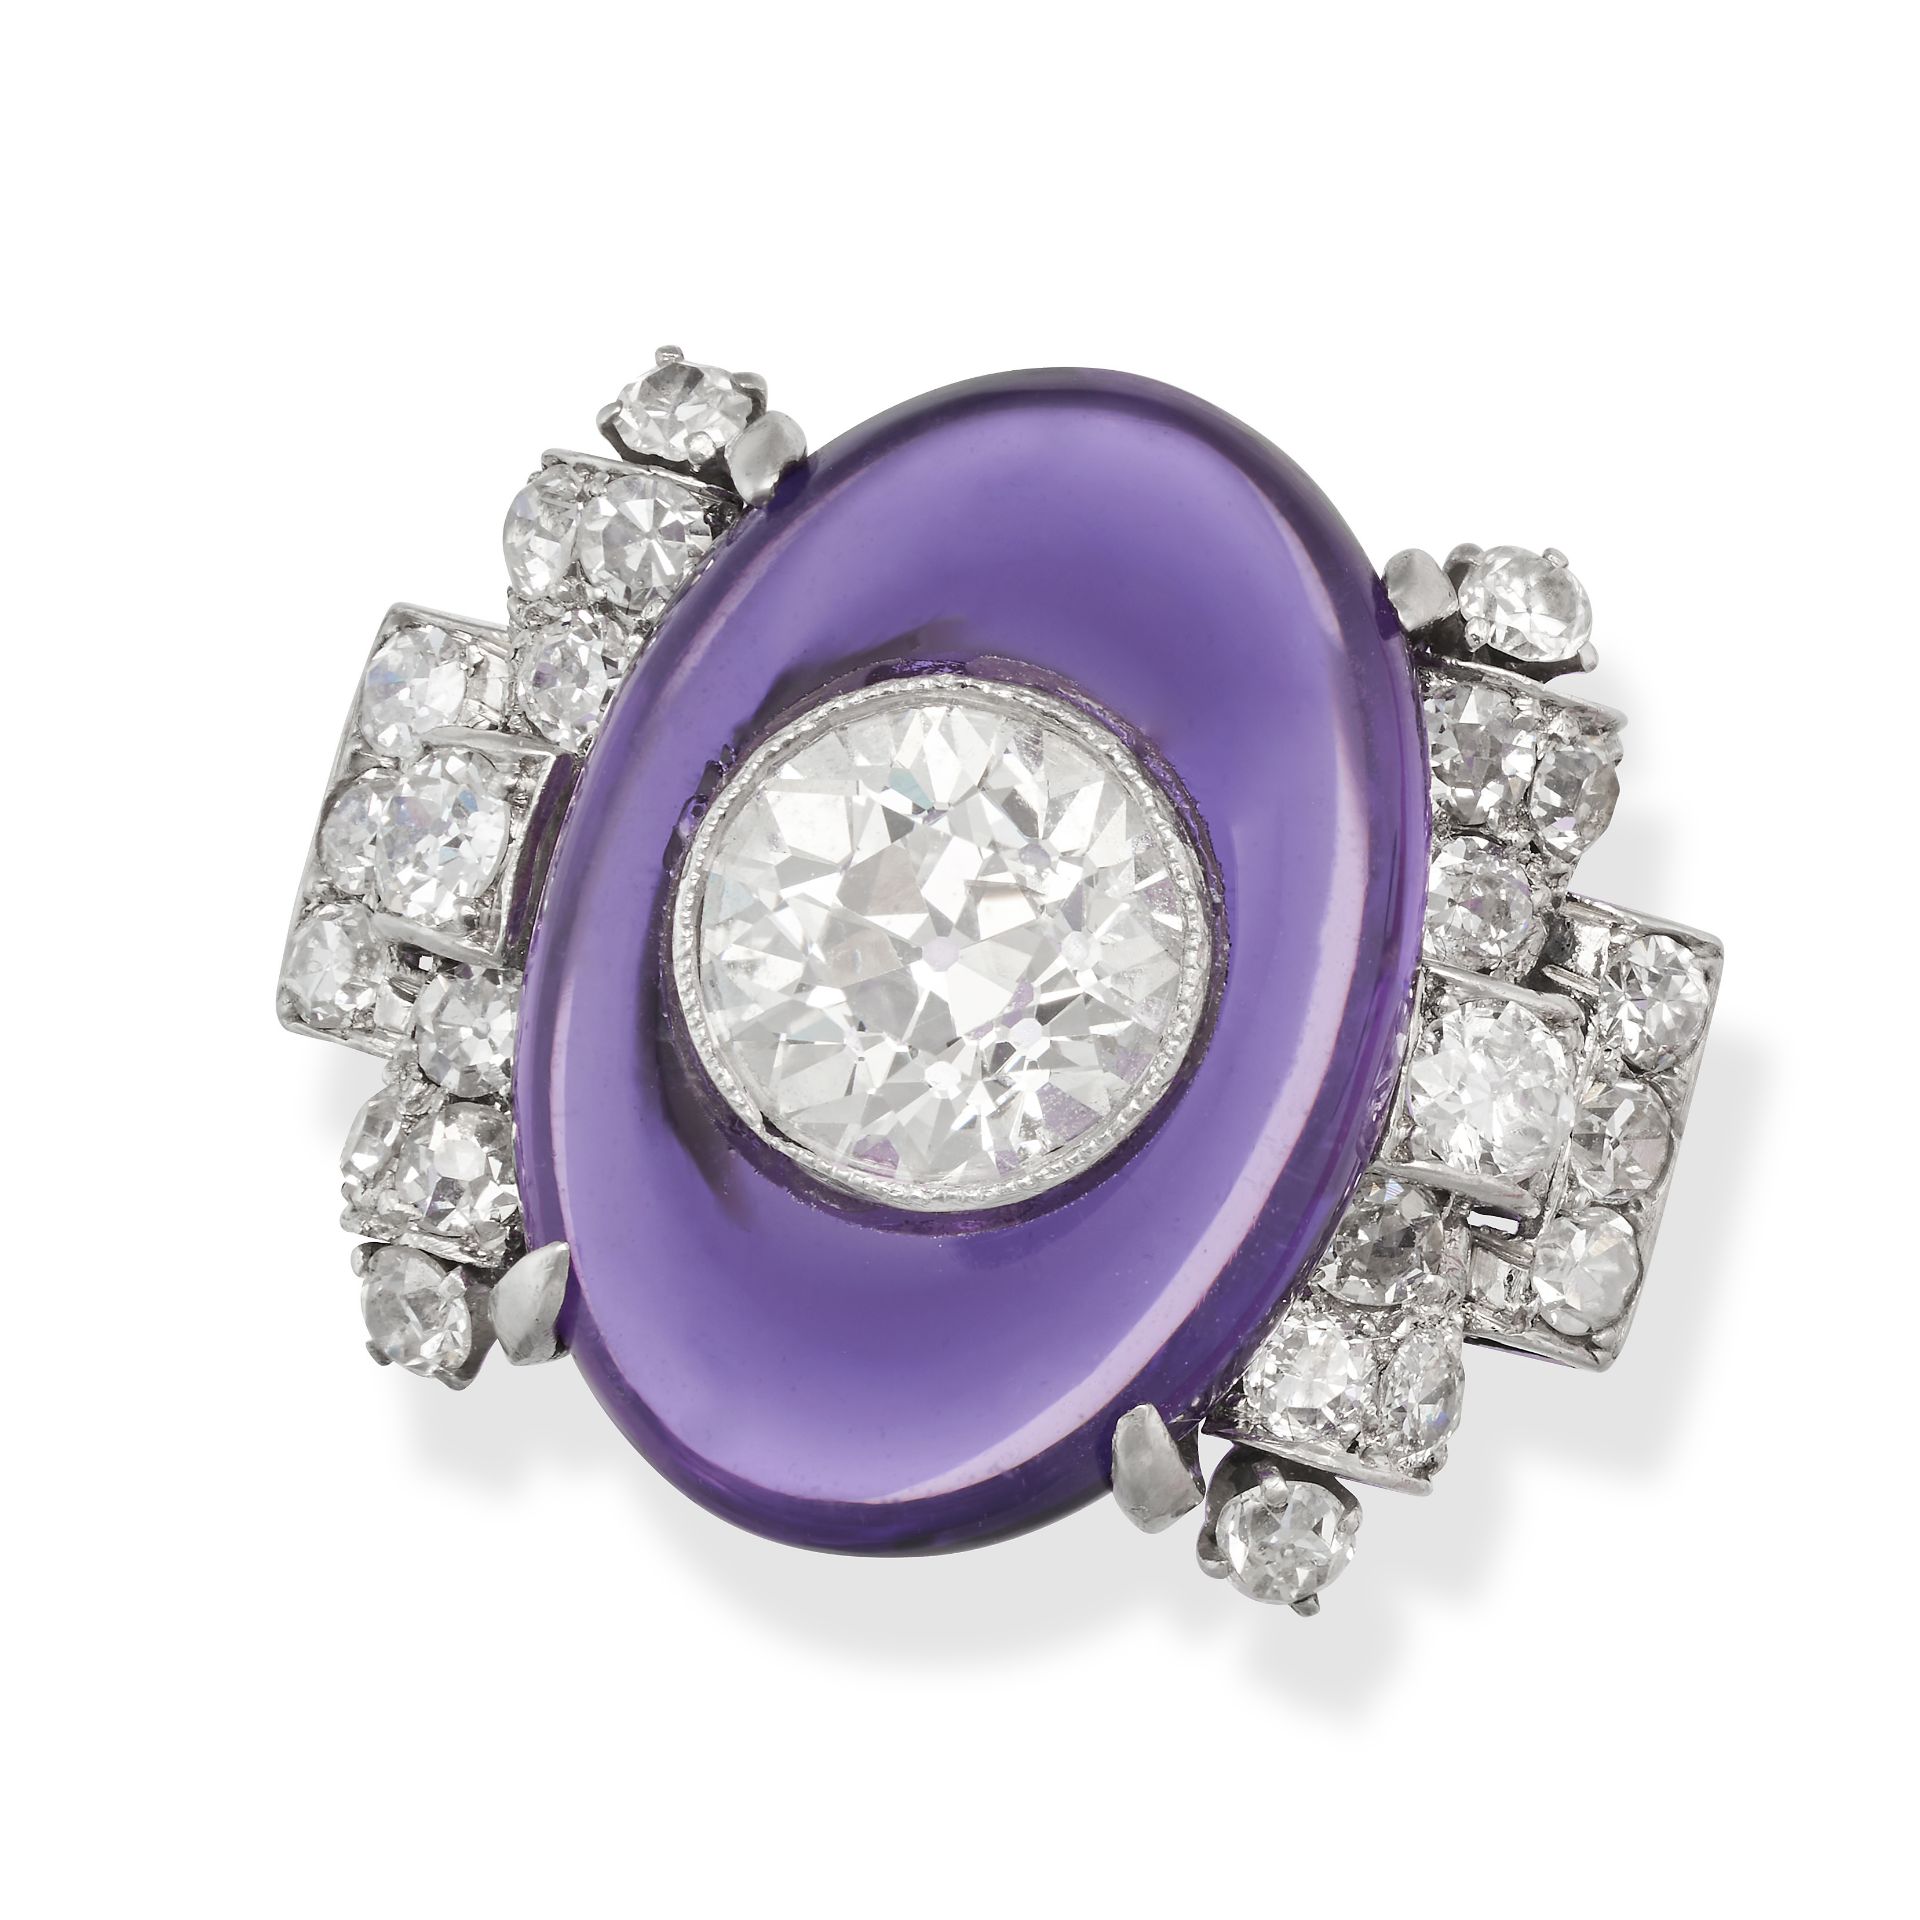 A FINE ART DECO AMETHYST AND DIAMOND RING in platinum, set with an oval cabochon amethyst inlaid ...